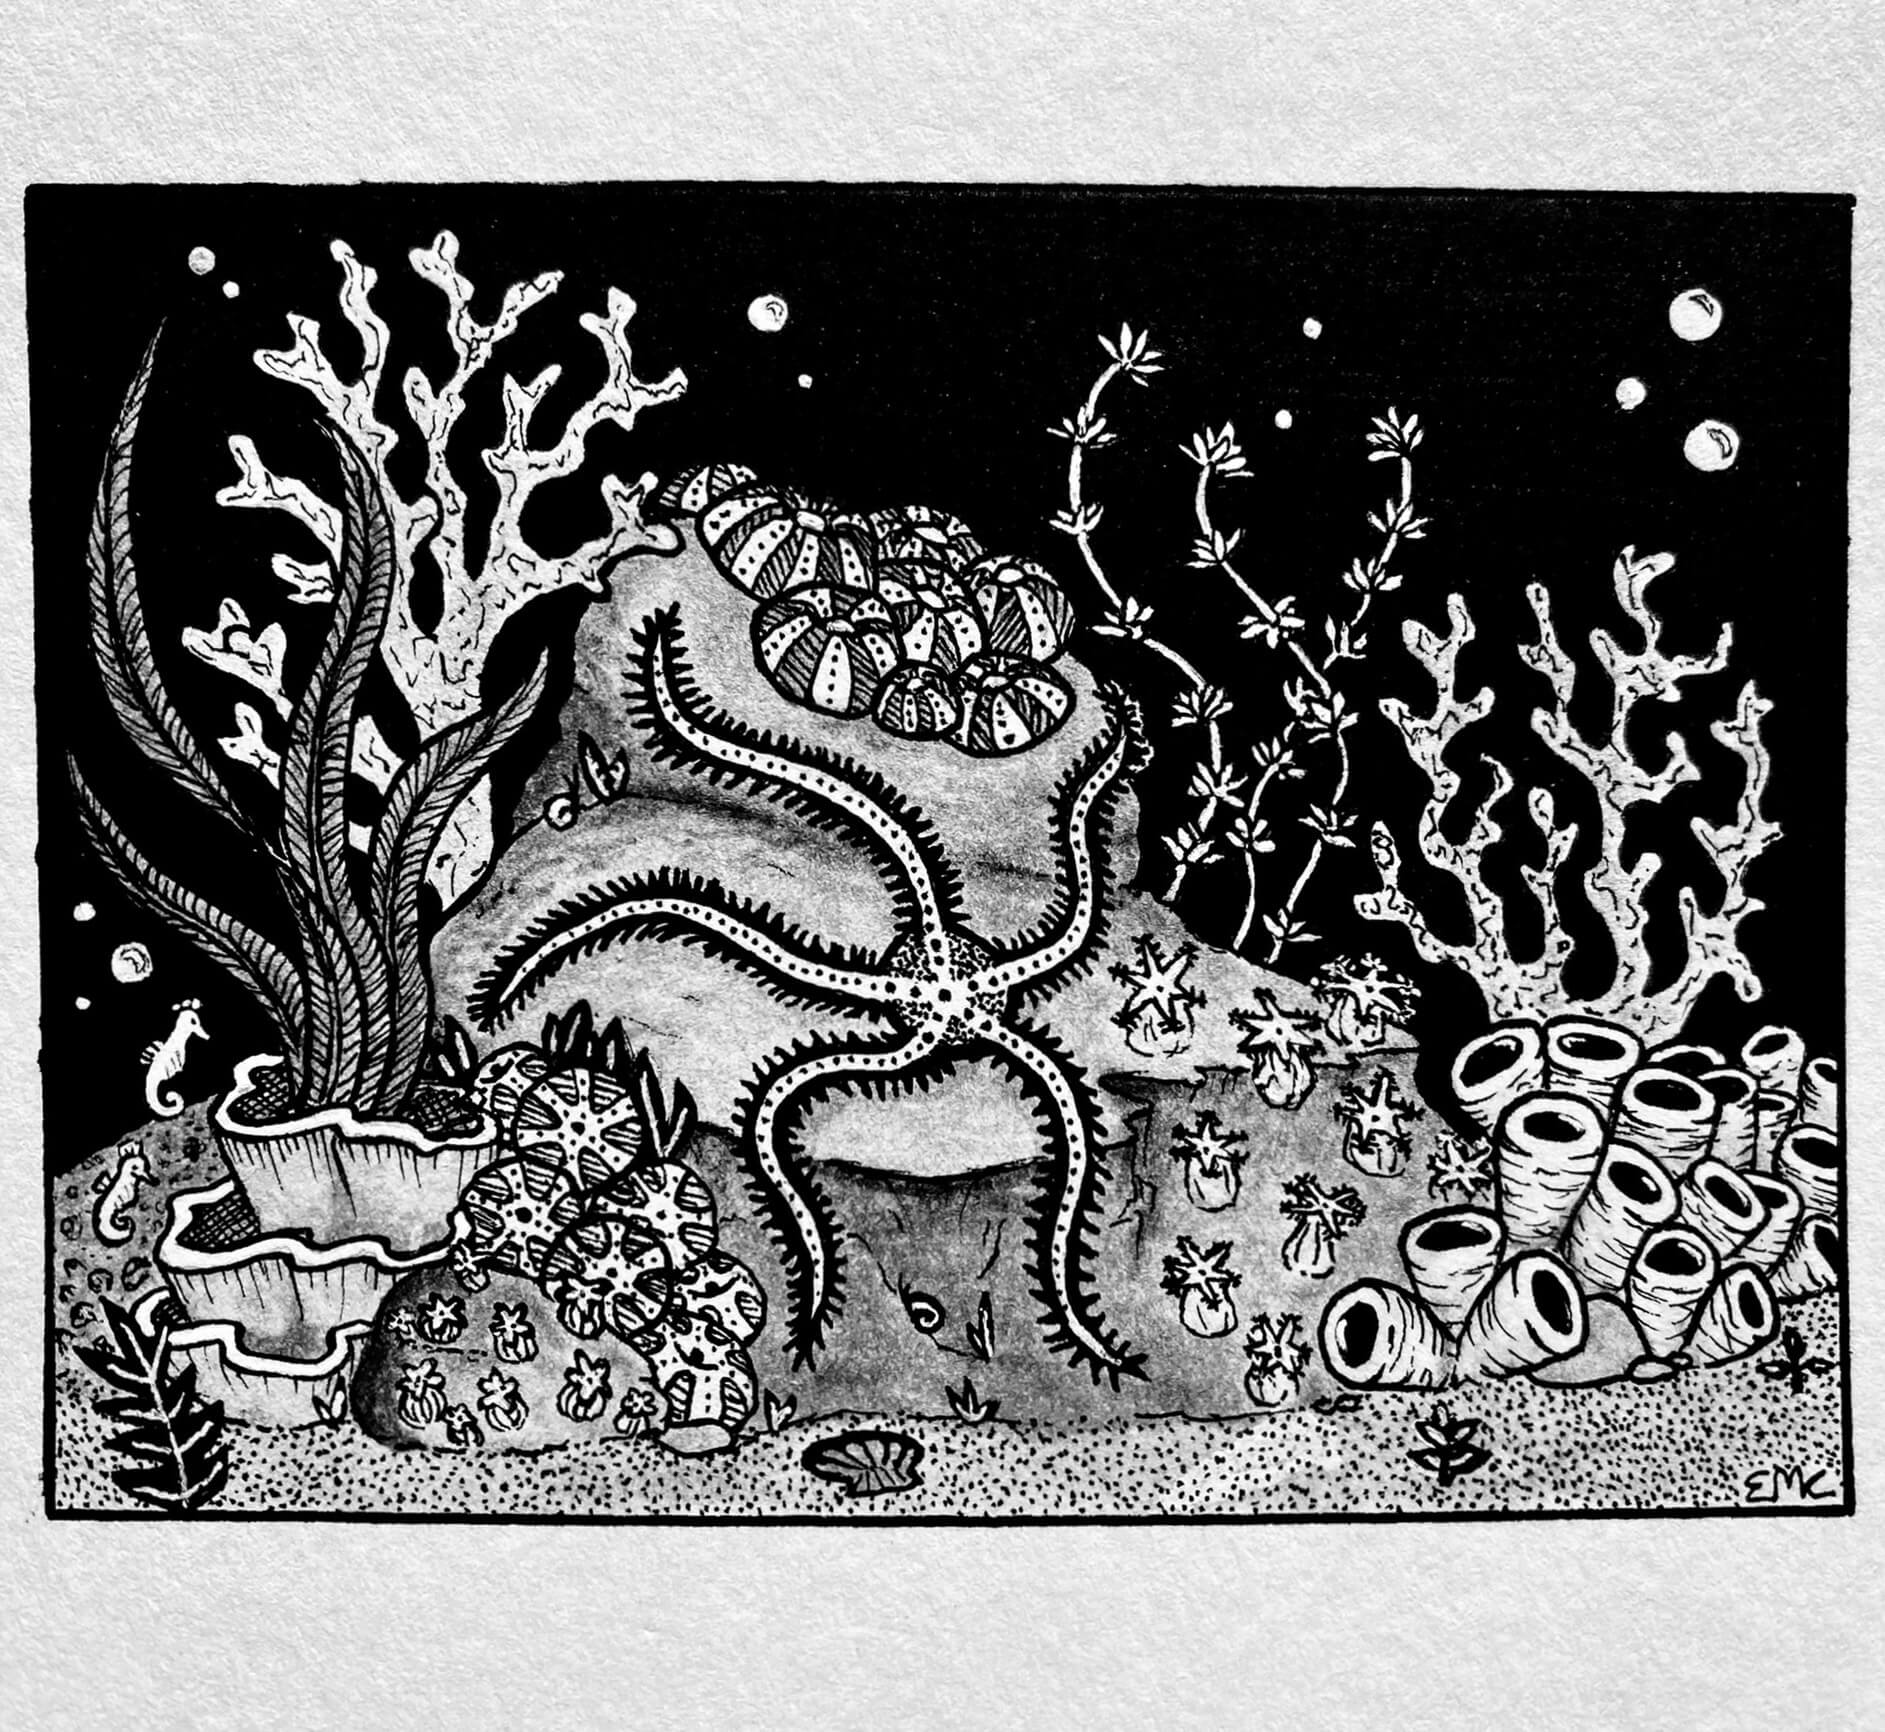 A monochrome drawing of a brittle sea star underwater with sea urchins, coral and a sea horse nearby.